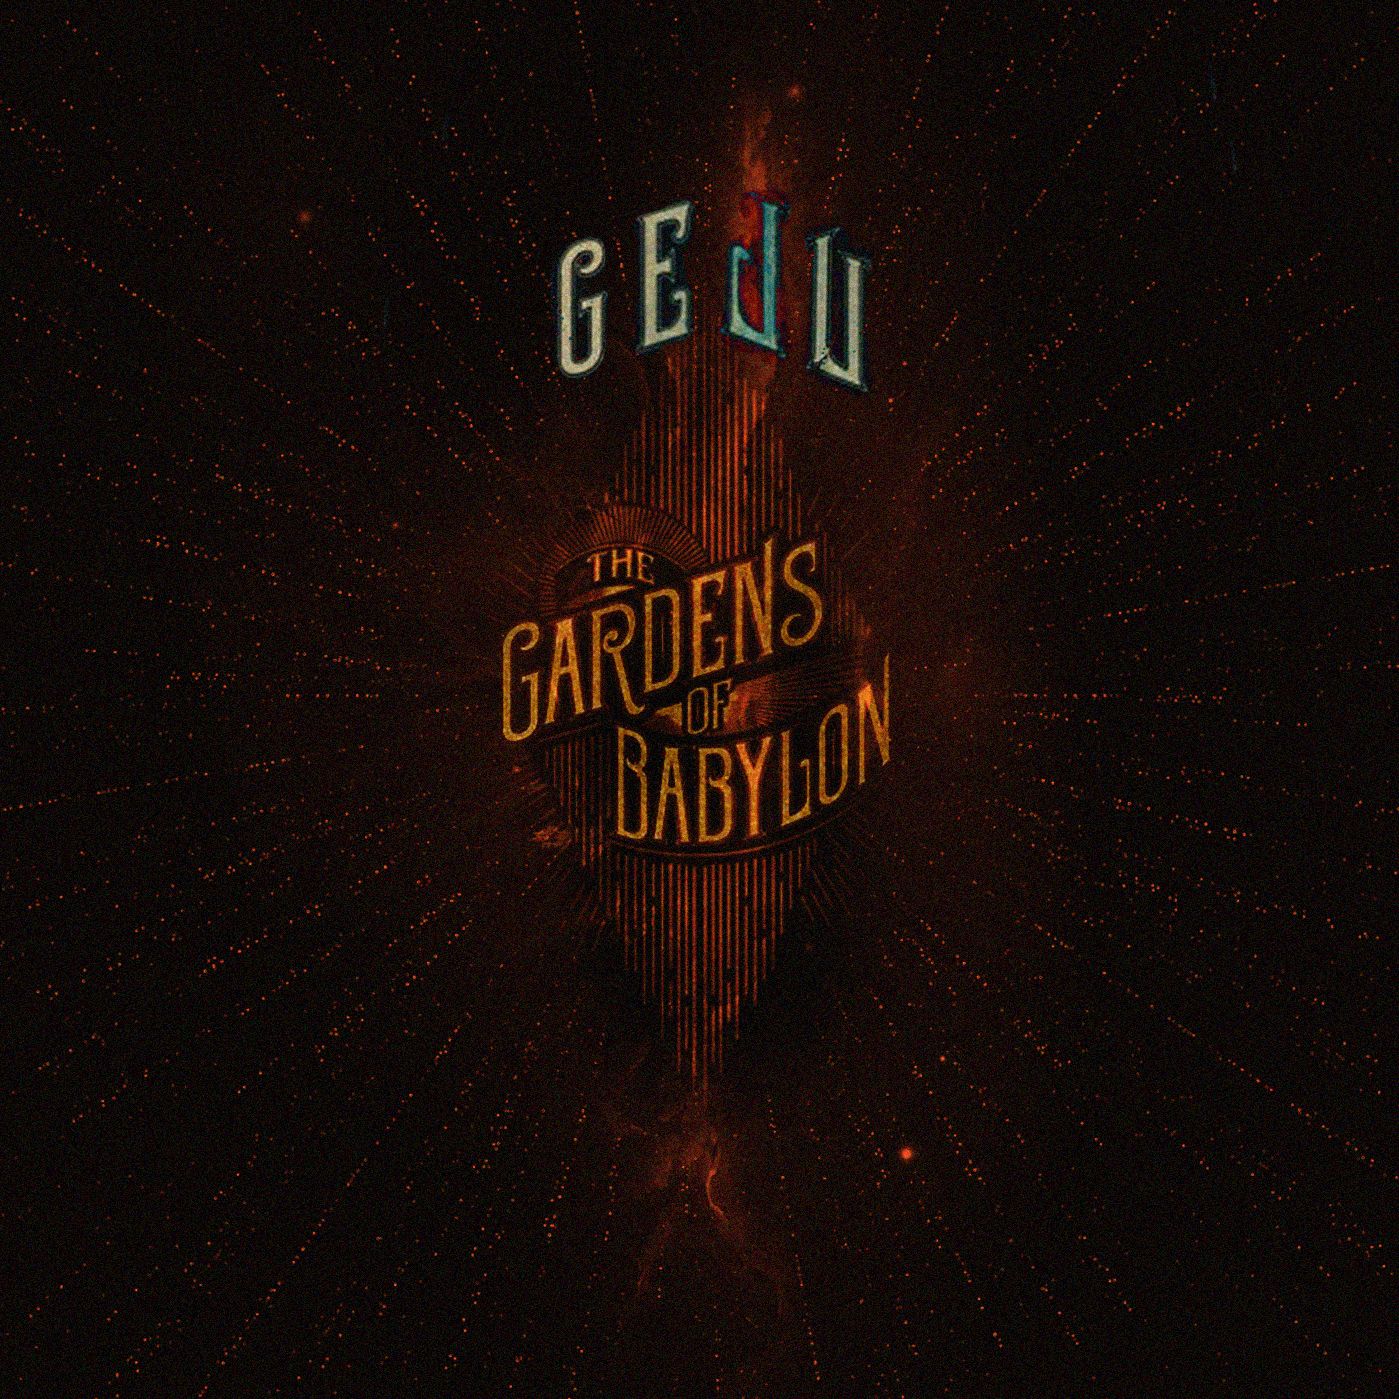 I-download The Seekers of Light Babylon at ADE 2021 - Geju